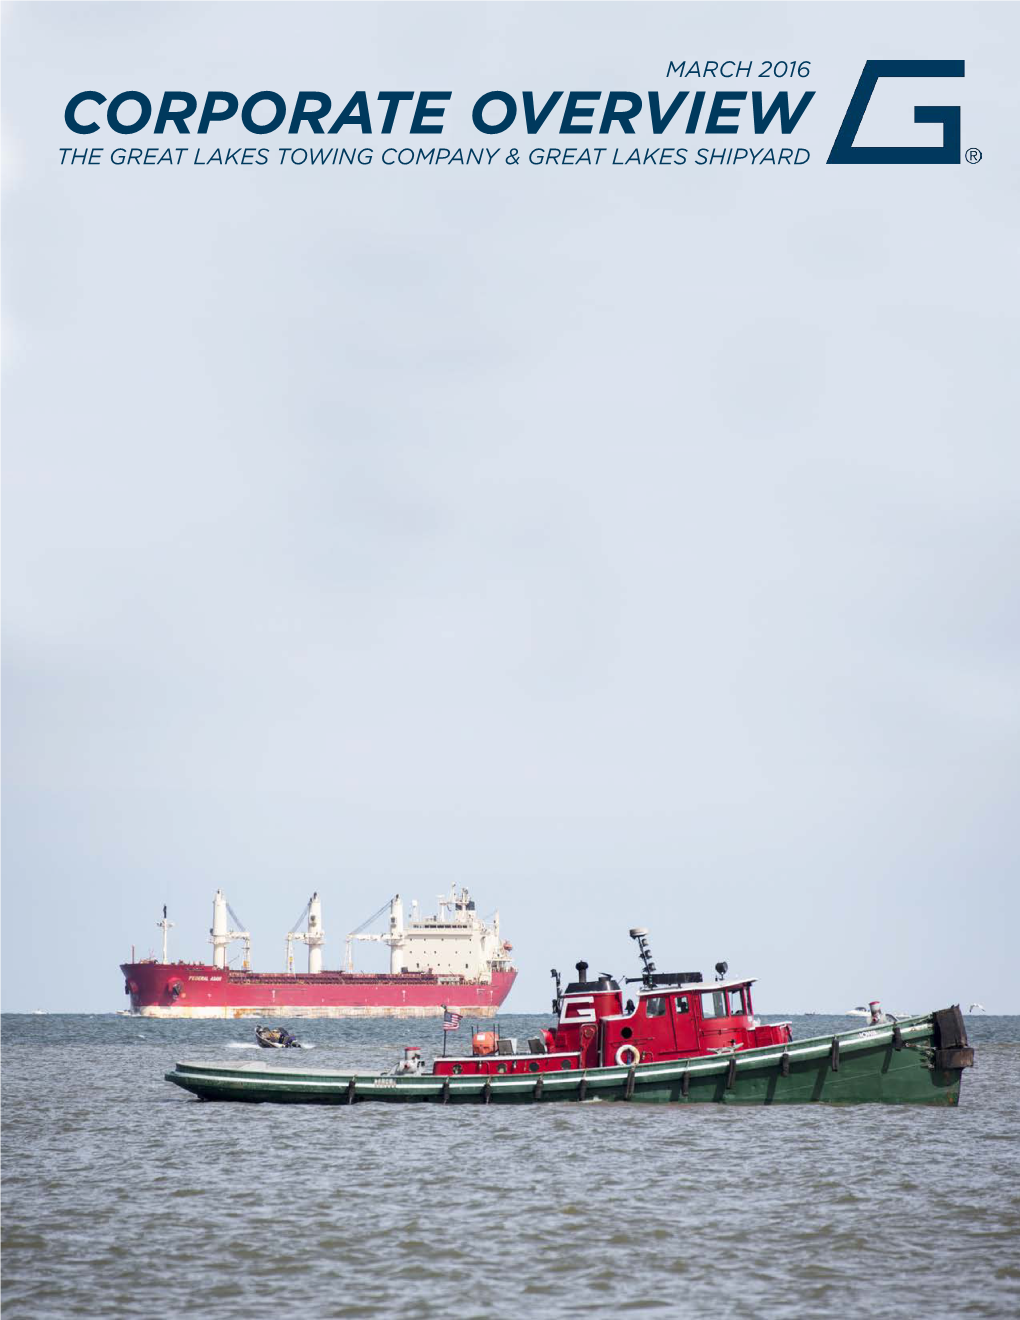 The-Great-Lakes-Towing-Company-Corporate-Overview-2016-03.Pdf